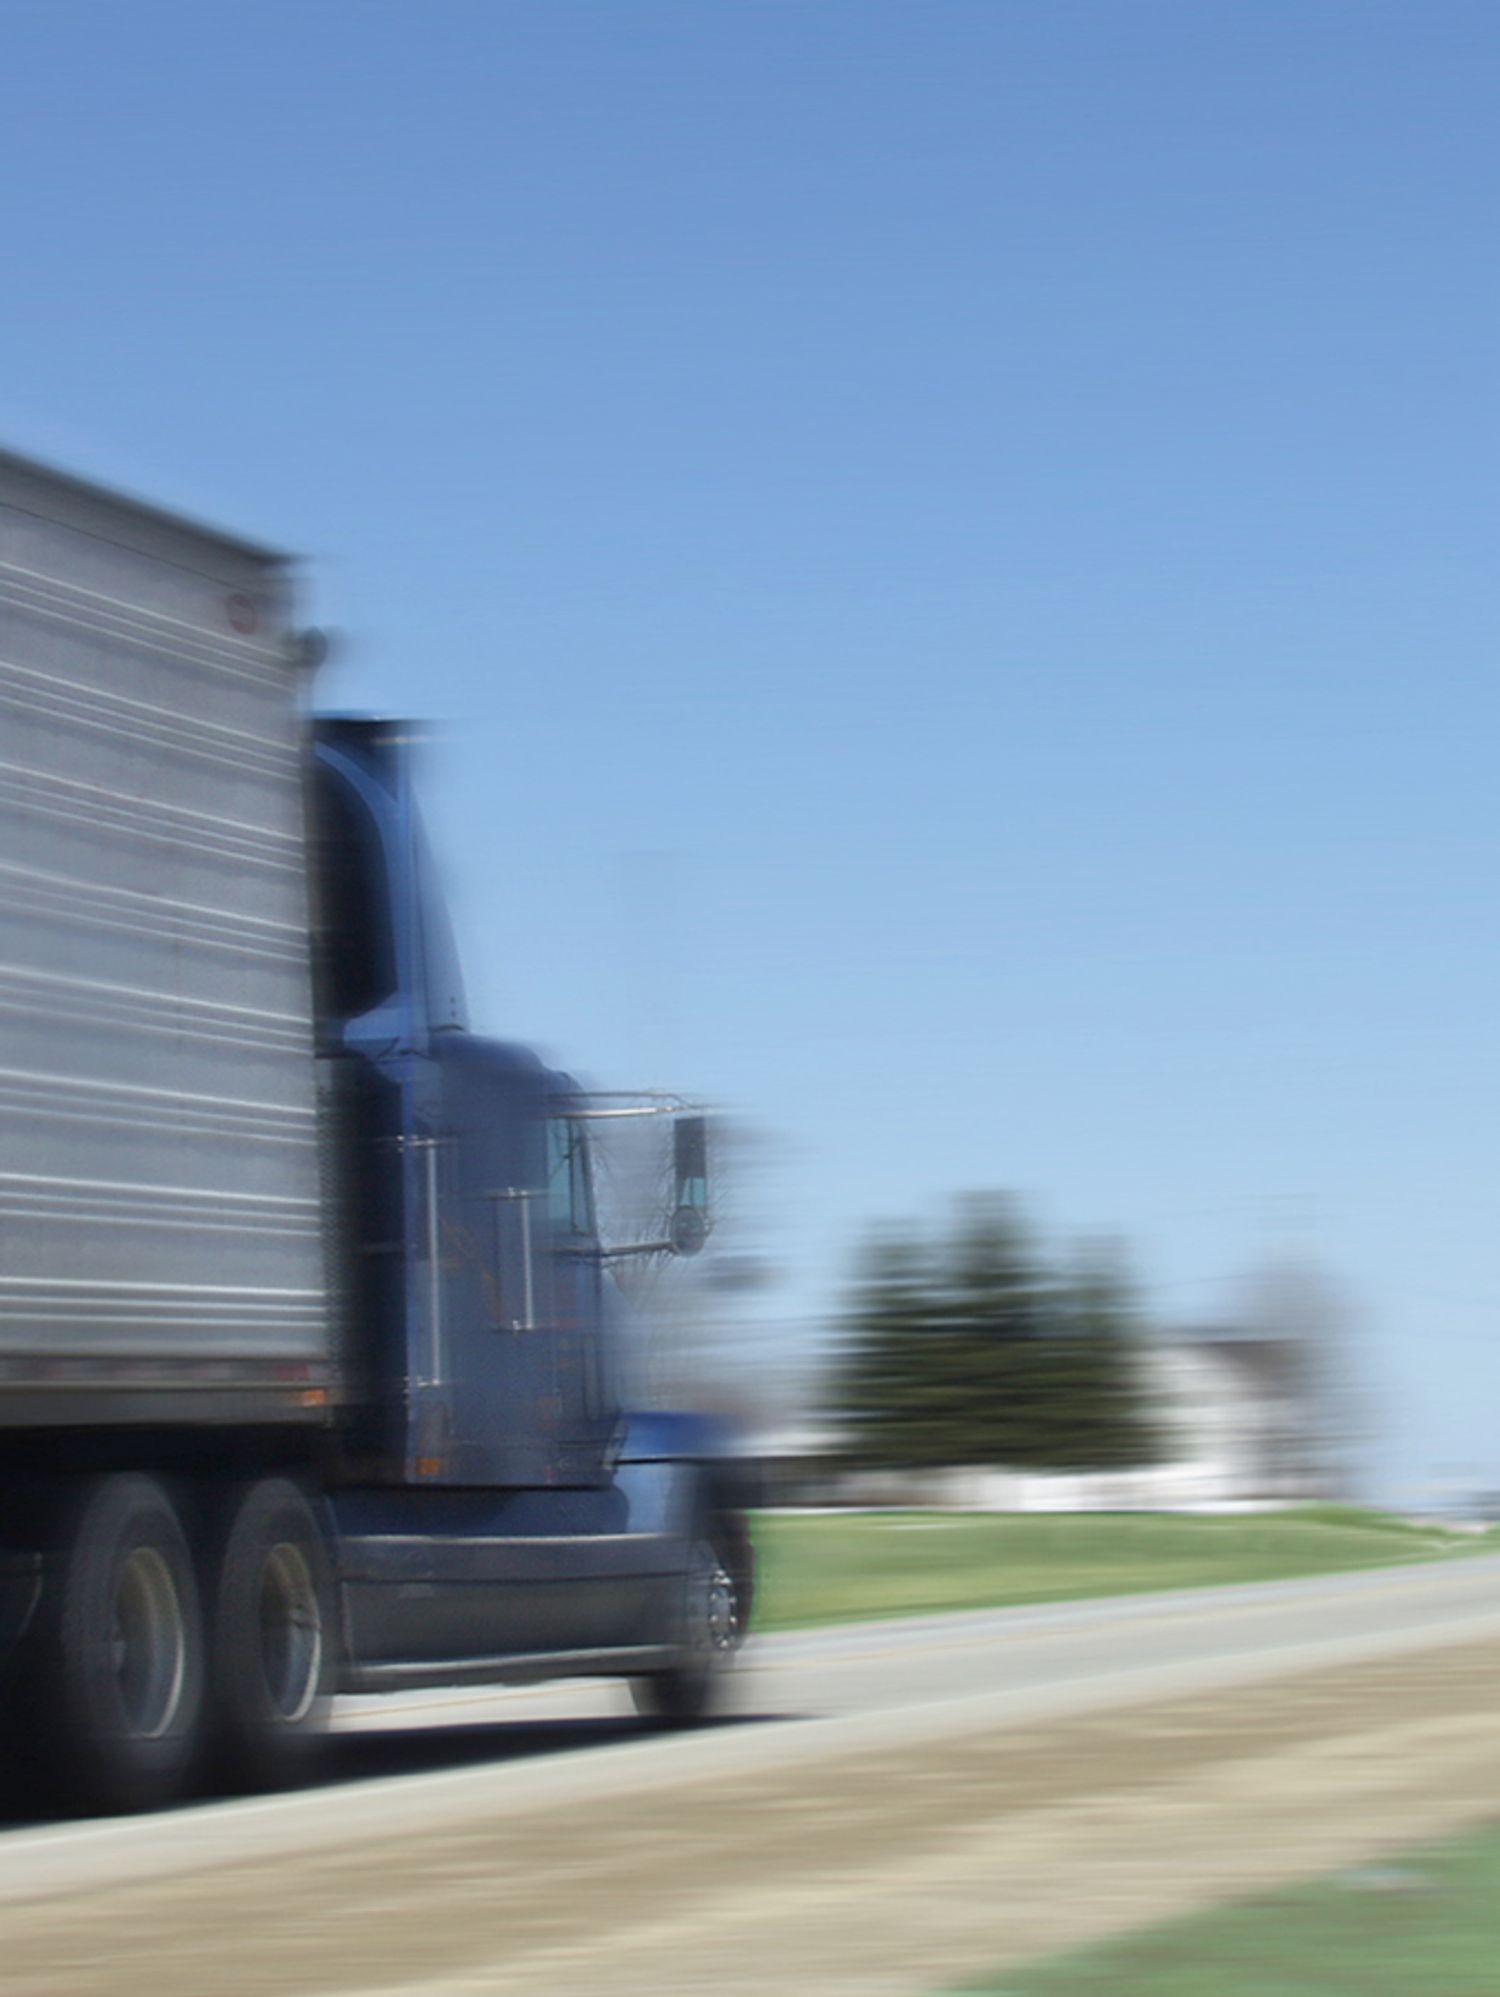 Federal Government Suspends Long-Haul Truckers' Hours of Service Rules To  Help Cope With COVID-19 Pandemic